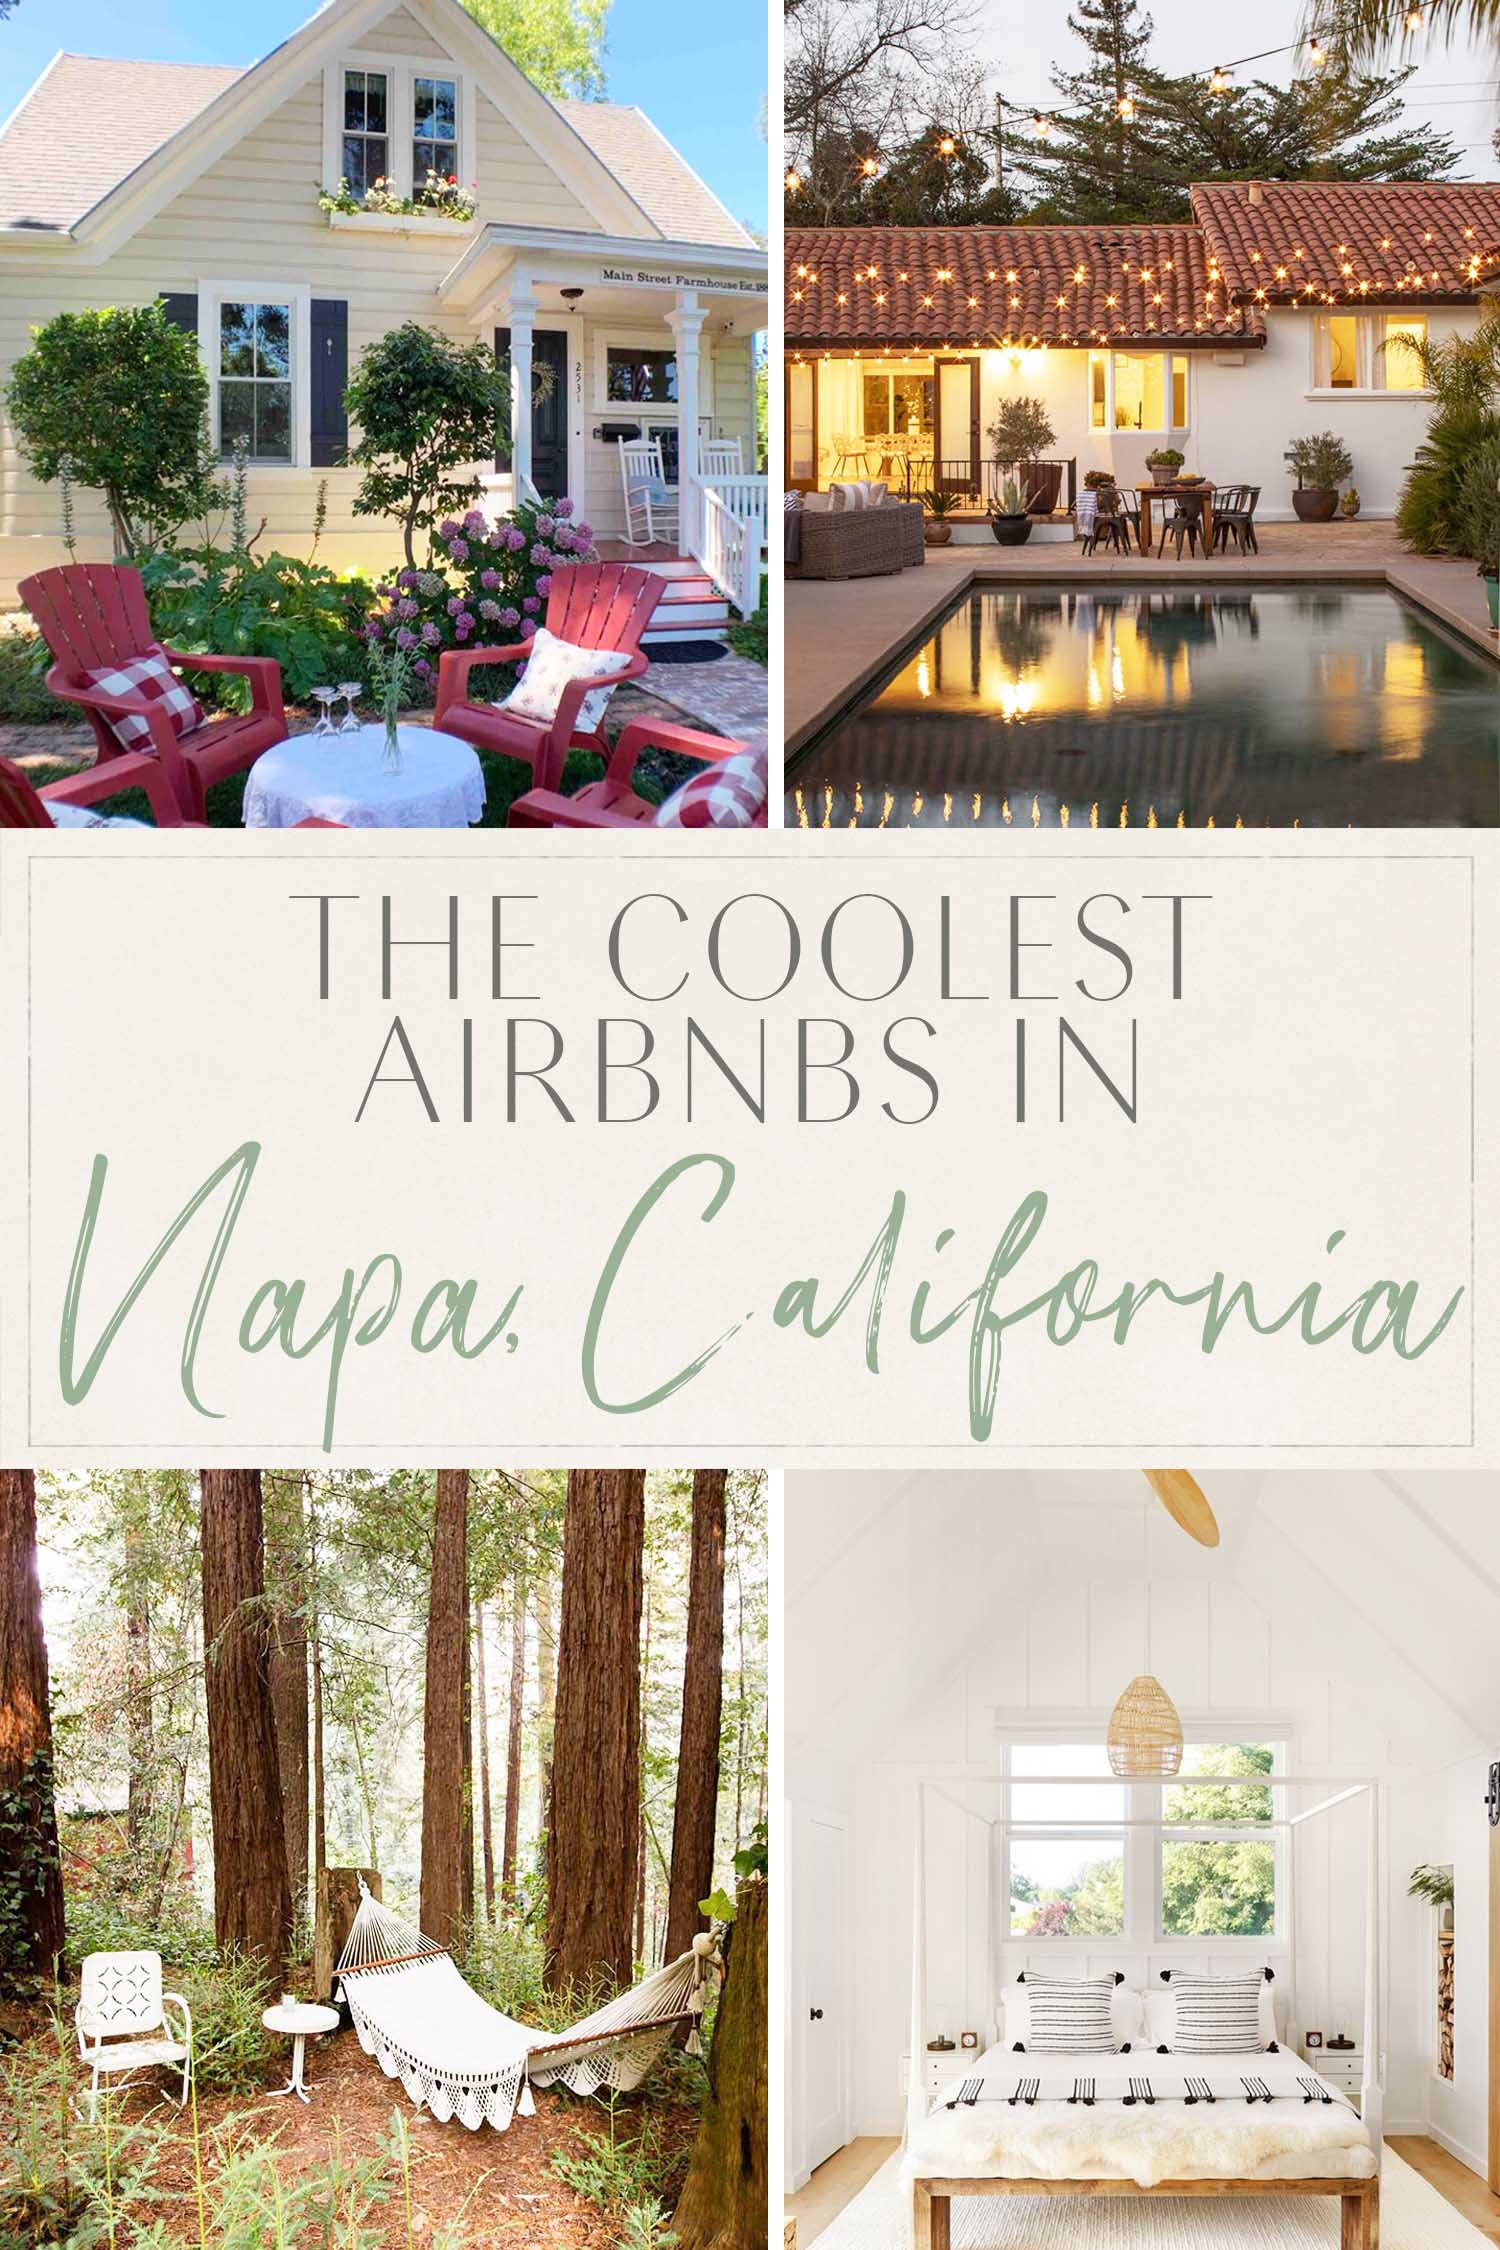 The Coolest Airbnbs in Napa California